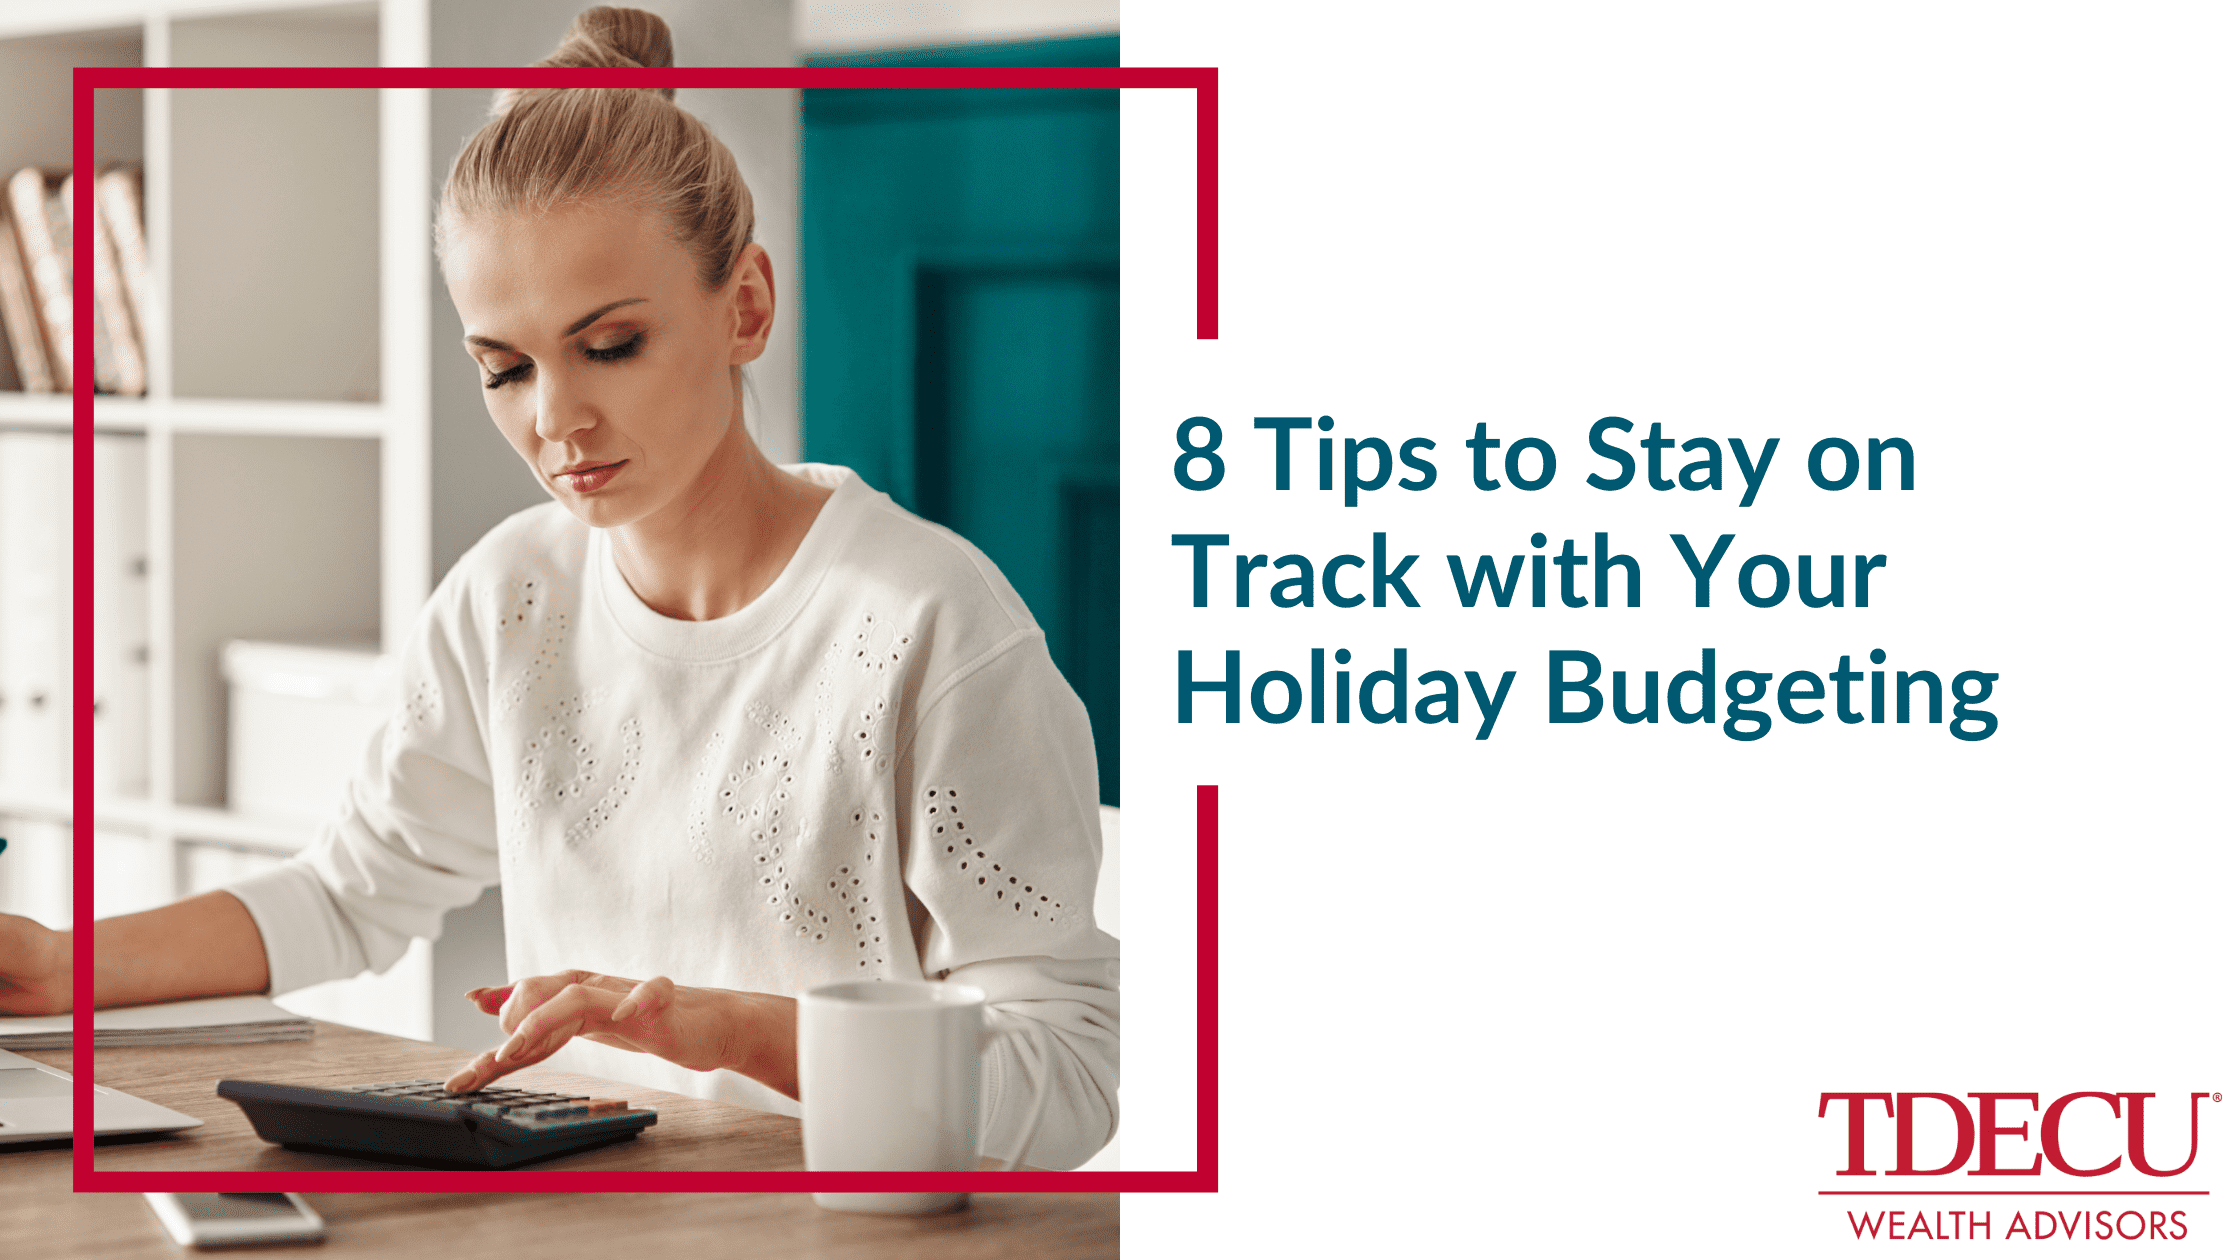 8 Tips to Stay on Track with Your Holiday Budgeting